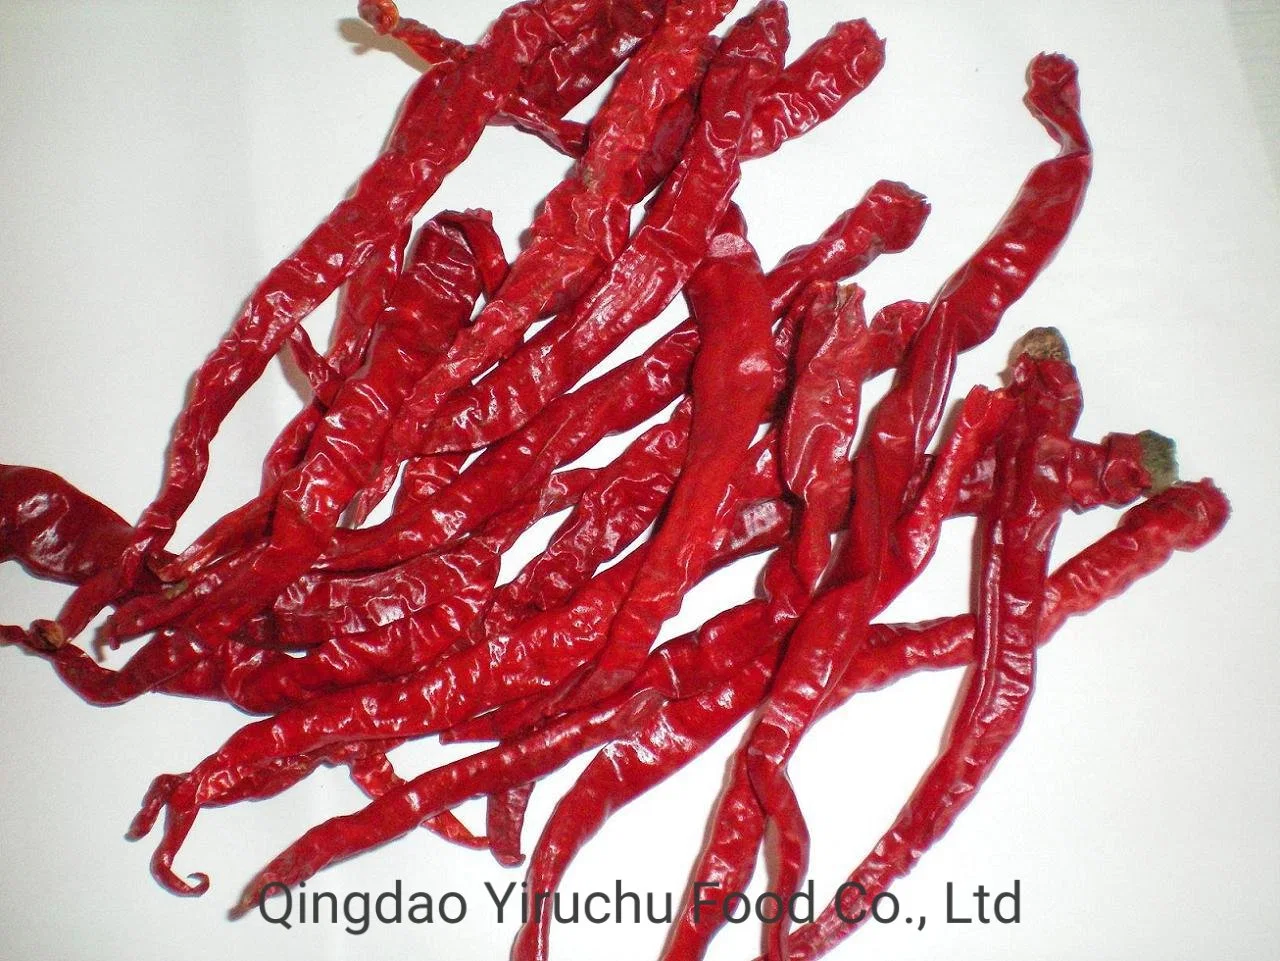 Red Chili, Dried Chili, Erjingtiao, Xianjiao, Beijing Red Chili Specially Provided for High-Quality Customers